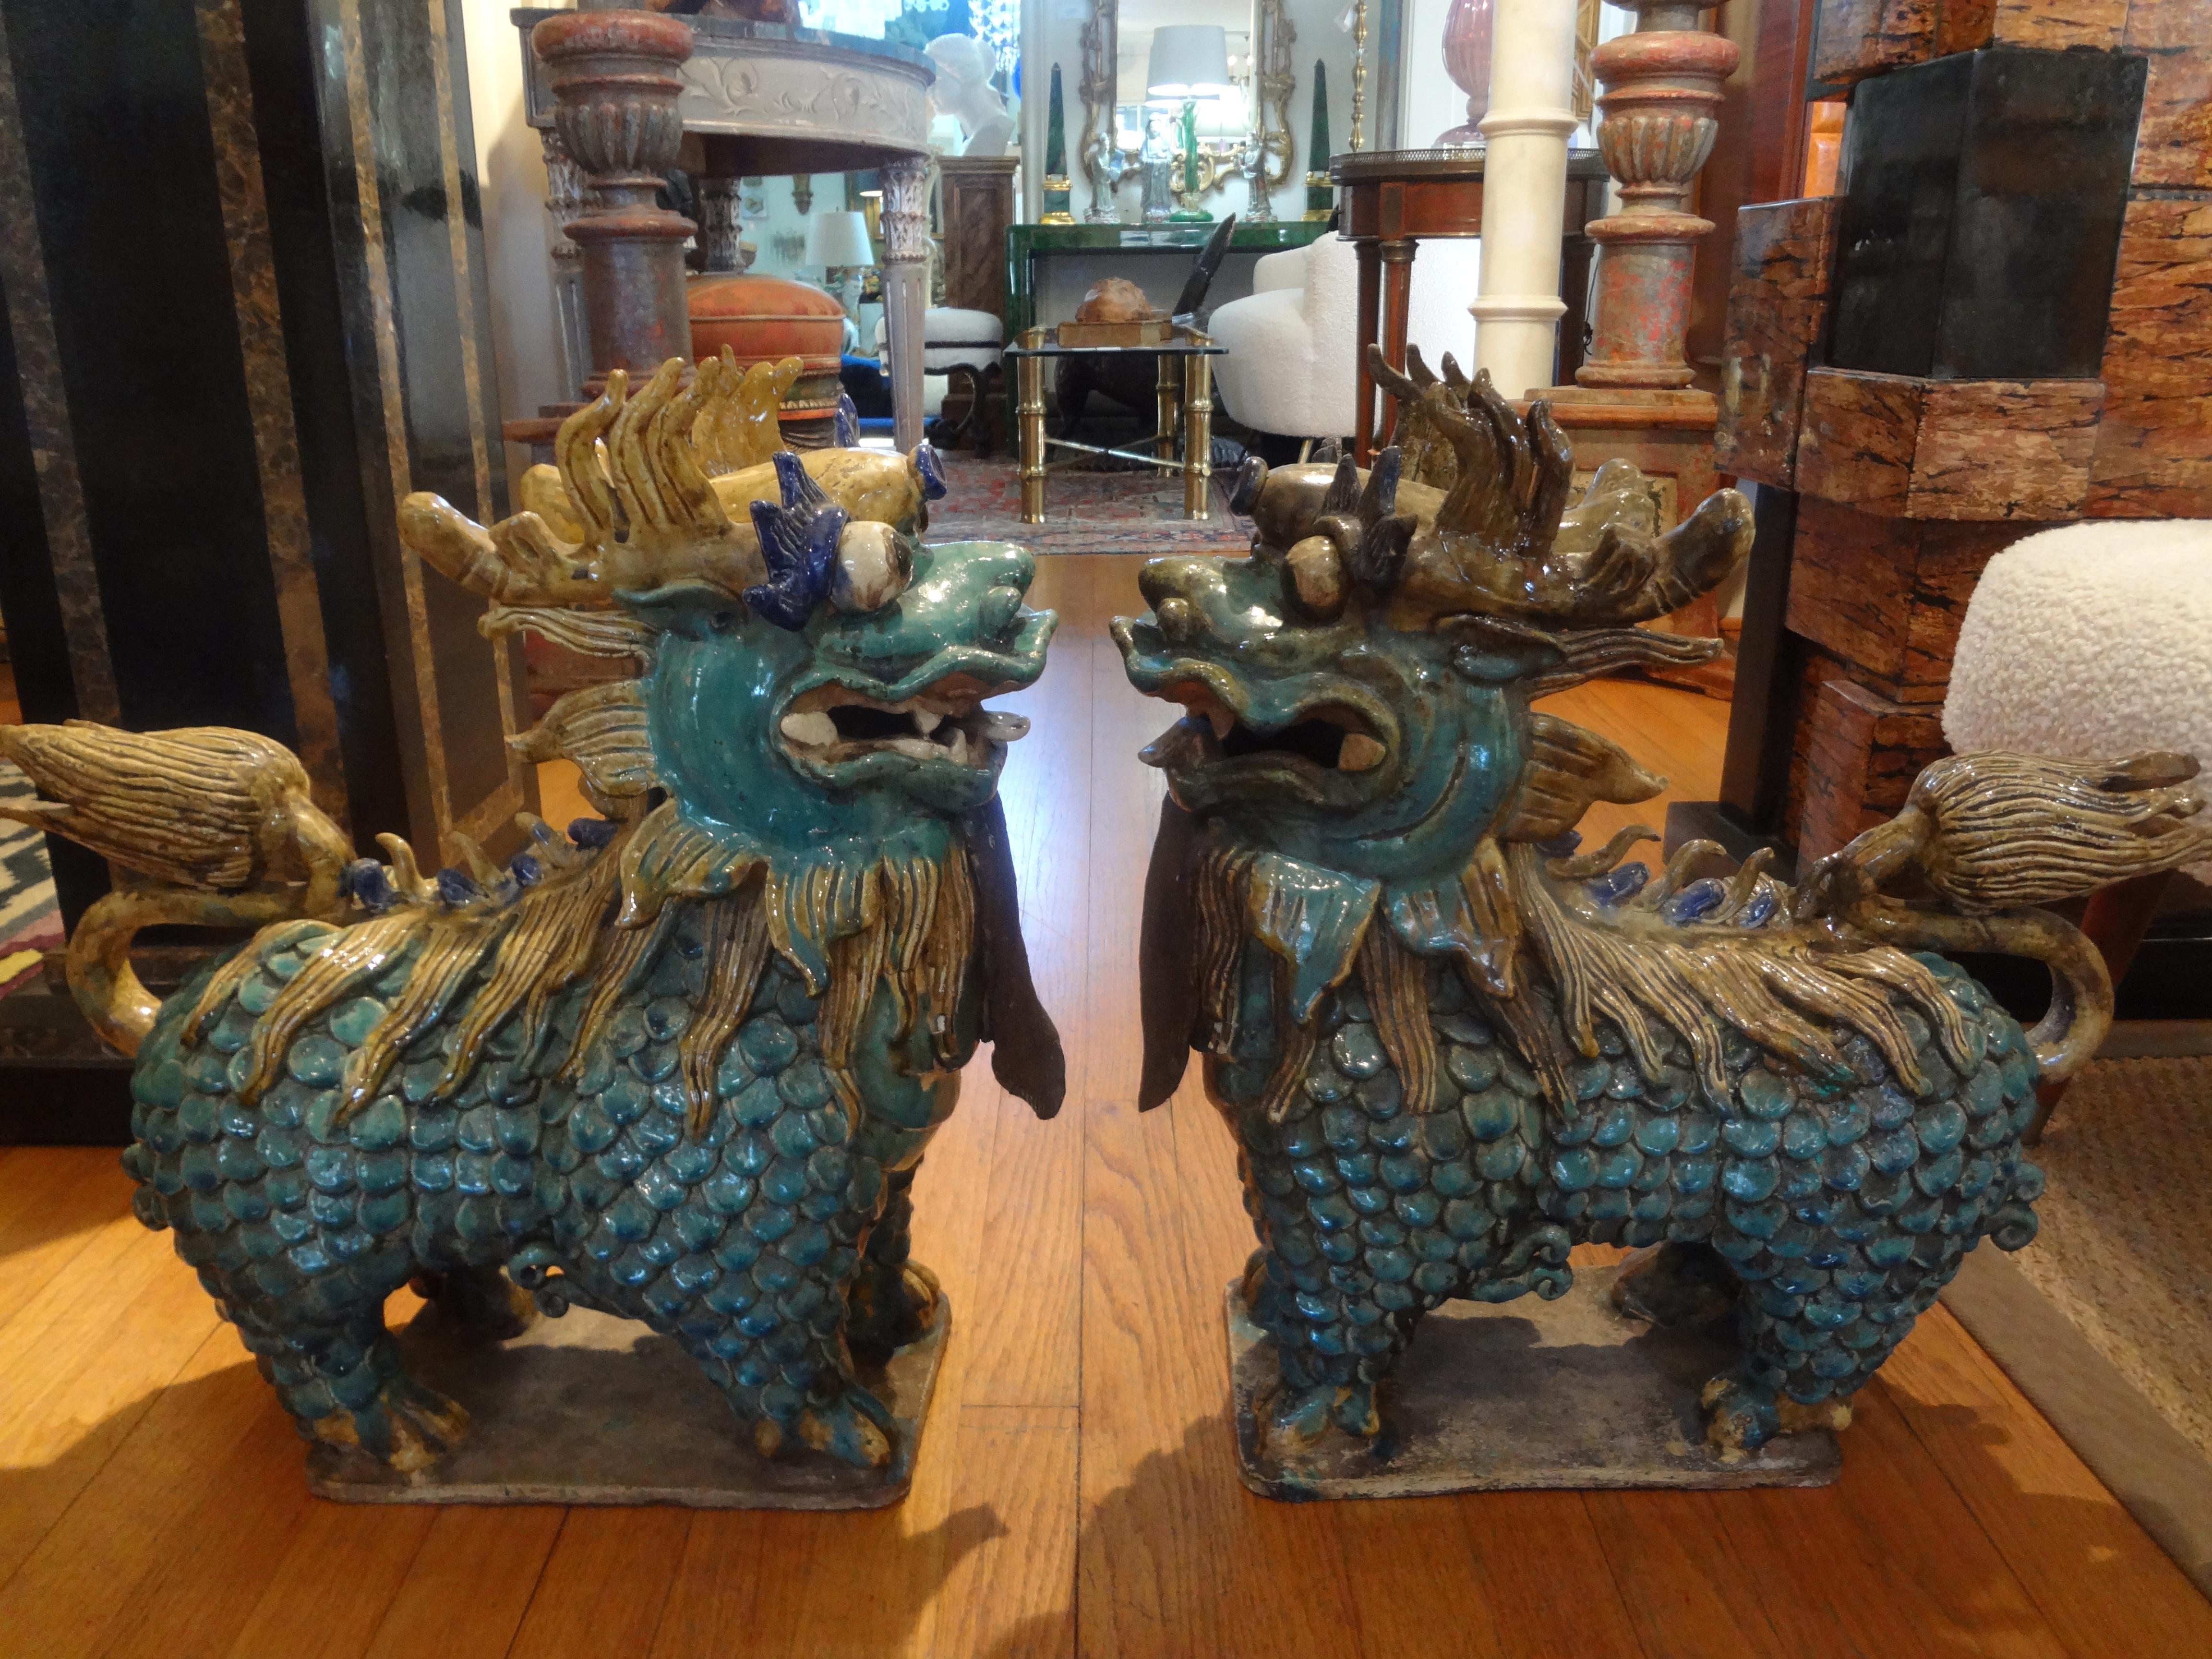 Large pair of antique Chinese porcelain foo dogs.
Stunning pair of antique Chinese hand decorated porcelain foo dogs or foo lions. This beautiful pair of Chinese foo dogs are executed in fabulous and unusual colors and date to the 1920s-1930s.